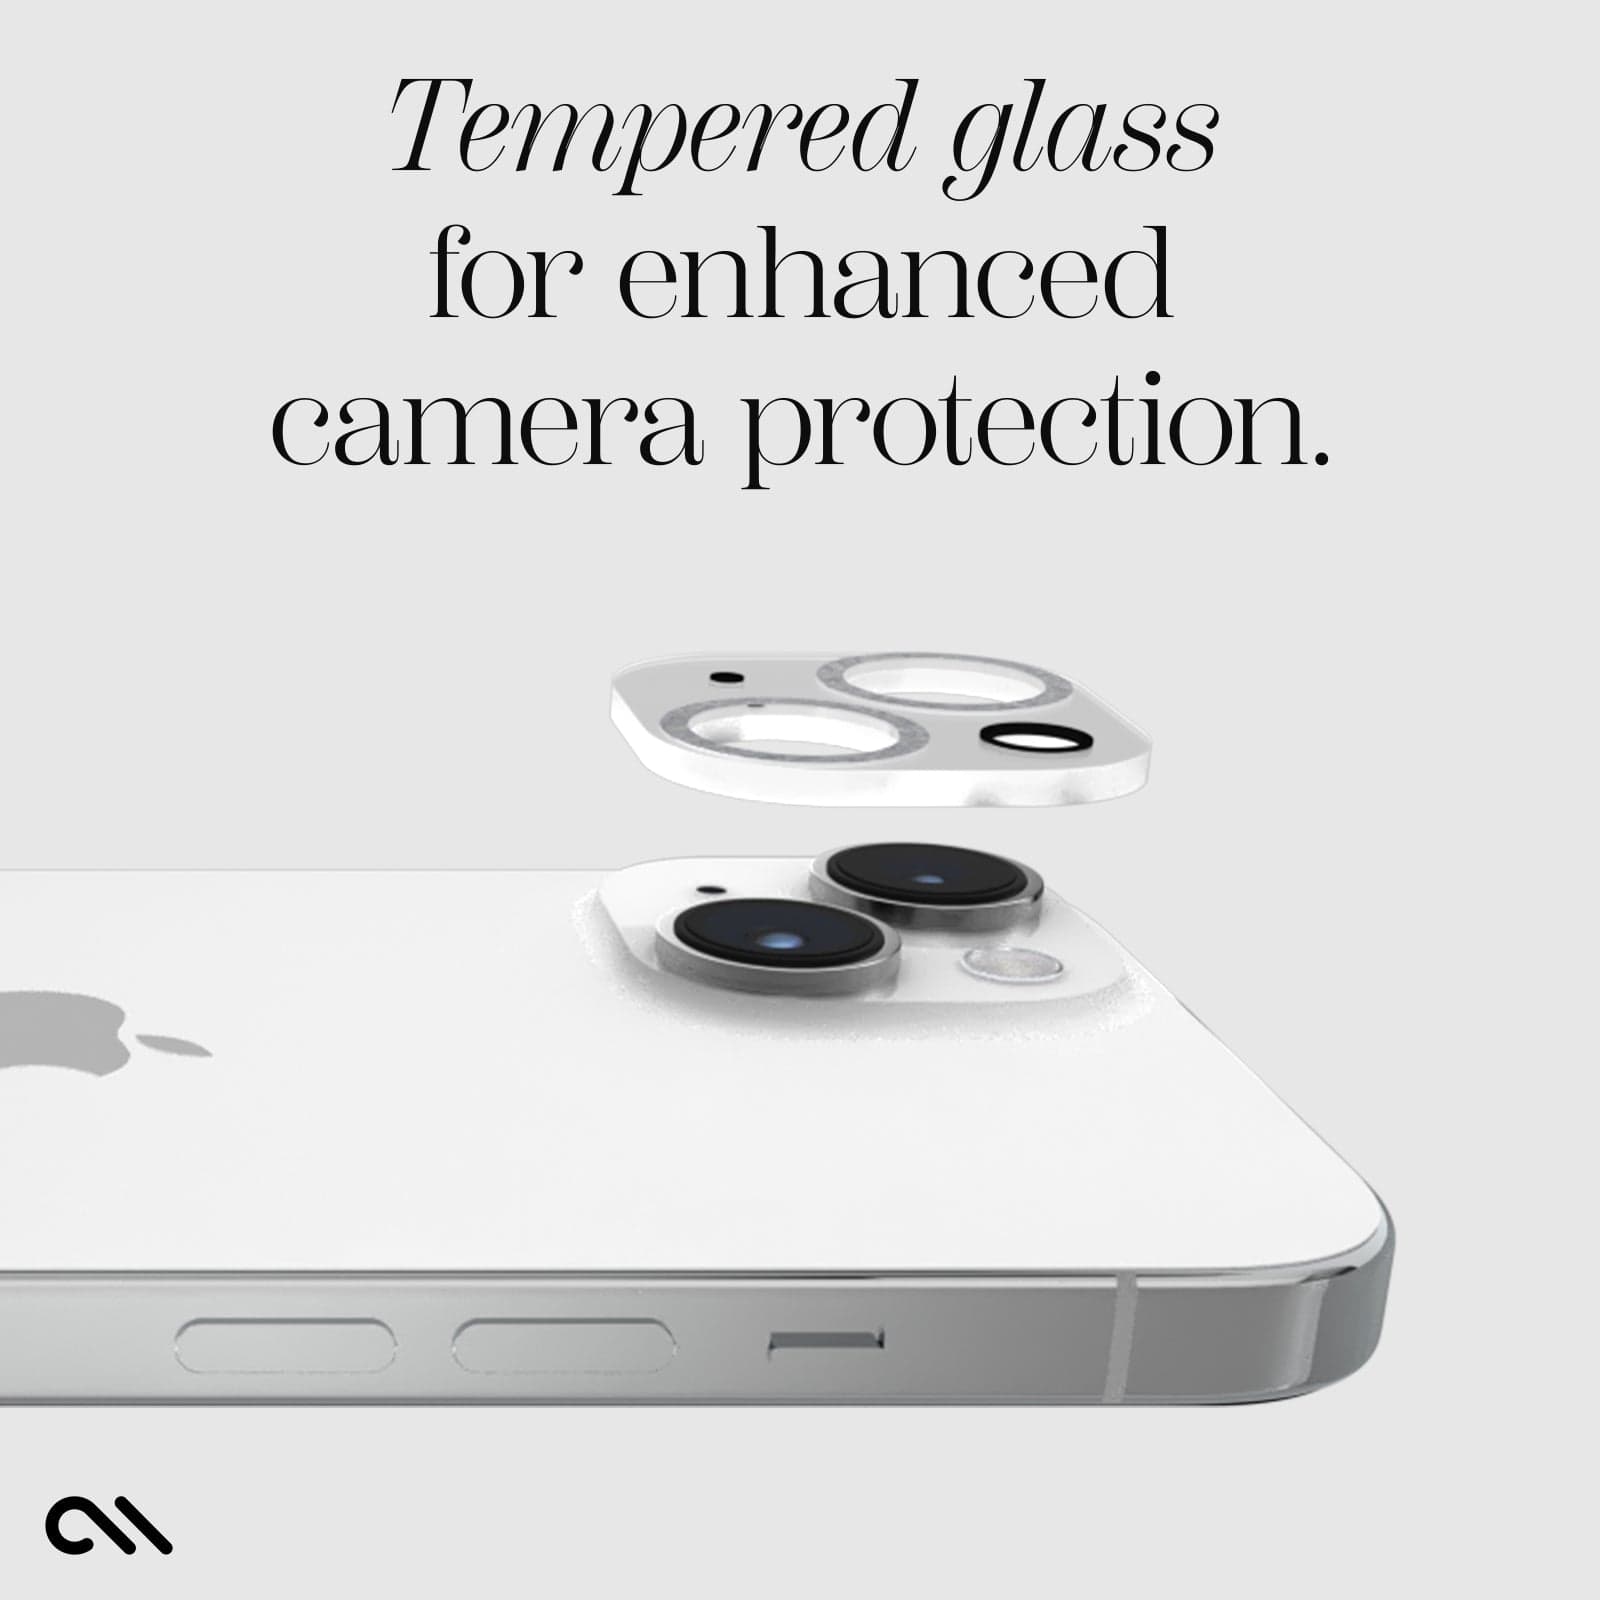 TEMPERED GLASS FOR ENHANCED CAMERA PROTECTION